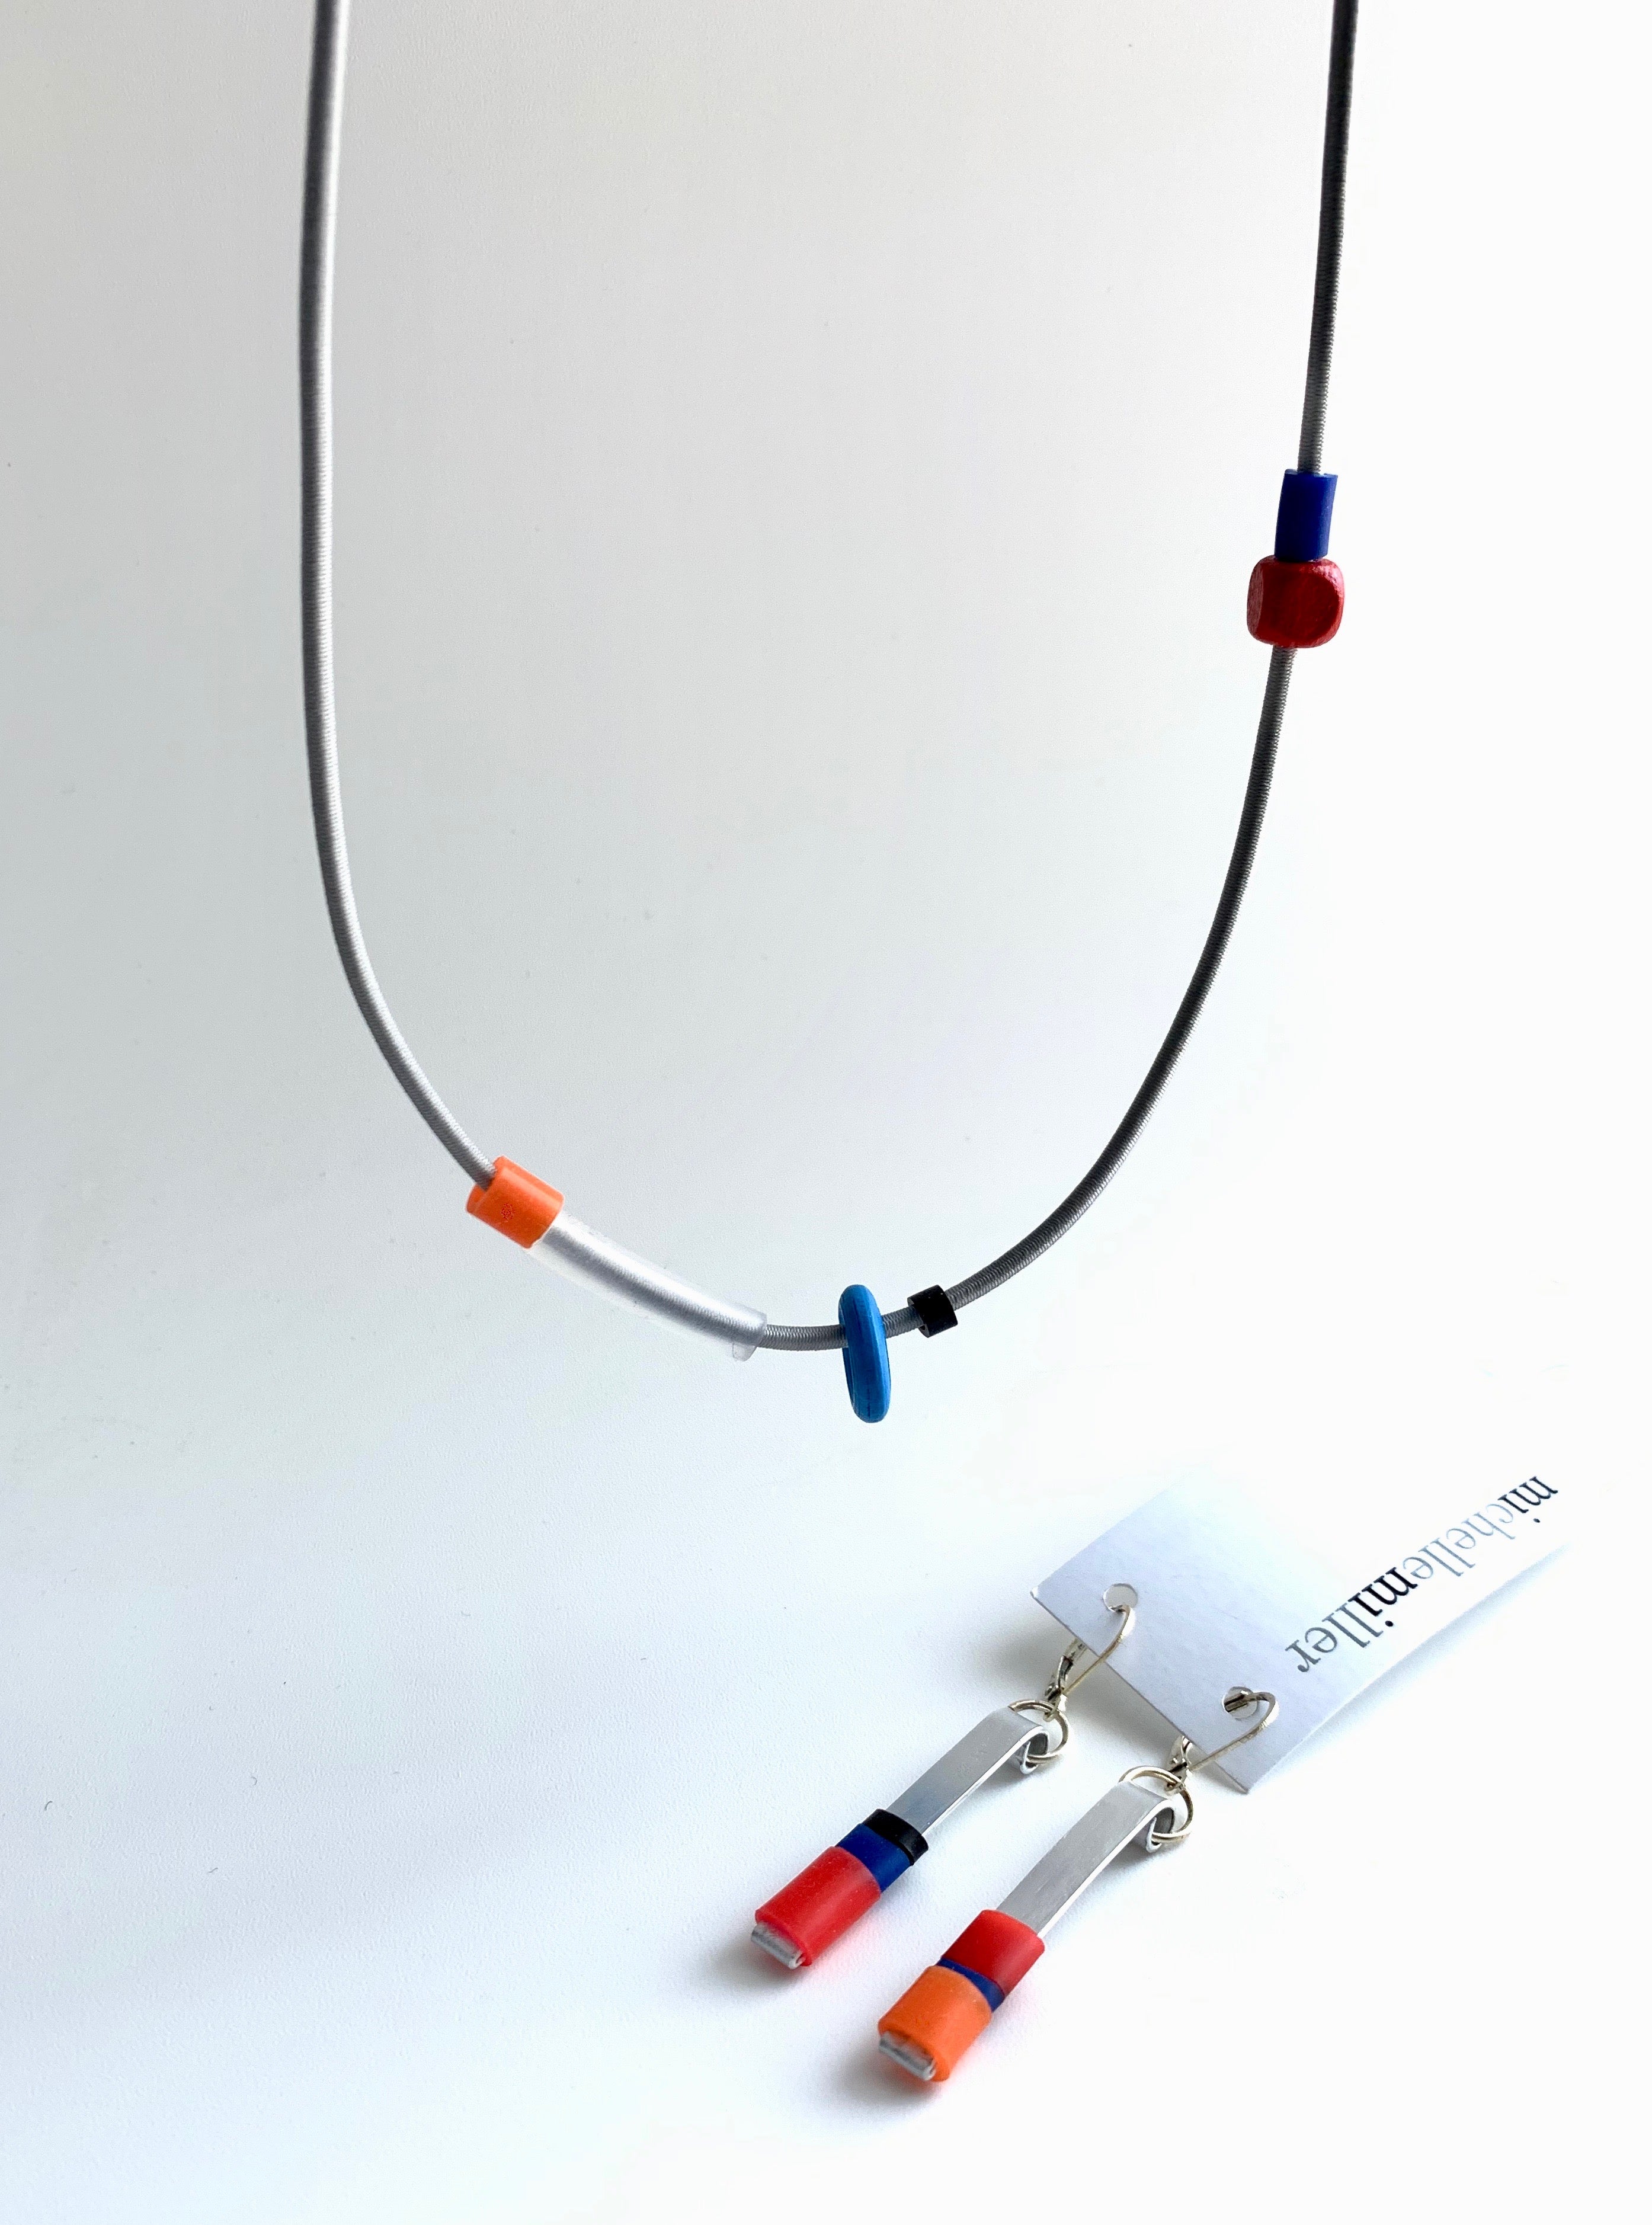 This necklace is made with shock cord silcone and wood  beads. It has an interlocking magnetic clasp and hangs 46cm long. It is paired here with the Matchstick earrings that go best with it. Each sold separately.